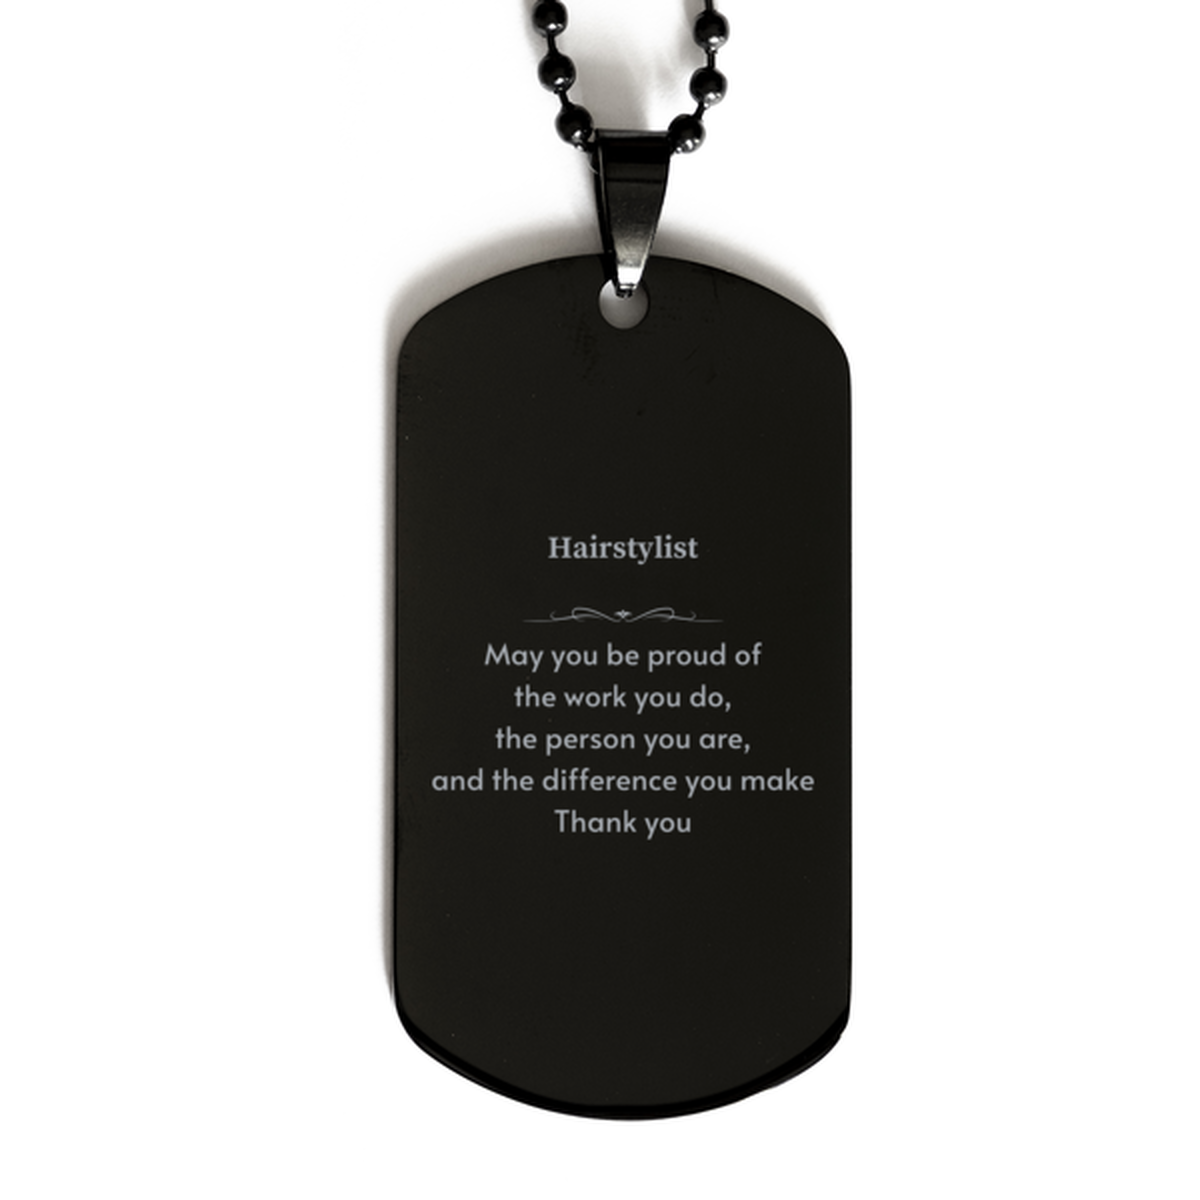 Heartwarming Black Dog Tag Retirement Coworkers Gifts for Hairstylist, Hairstylist May You be proud of the work you do, the person you are Gifts for Boss Men Women Friends